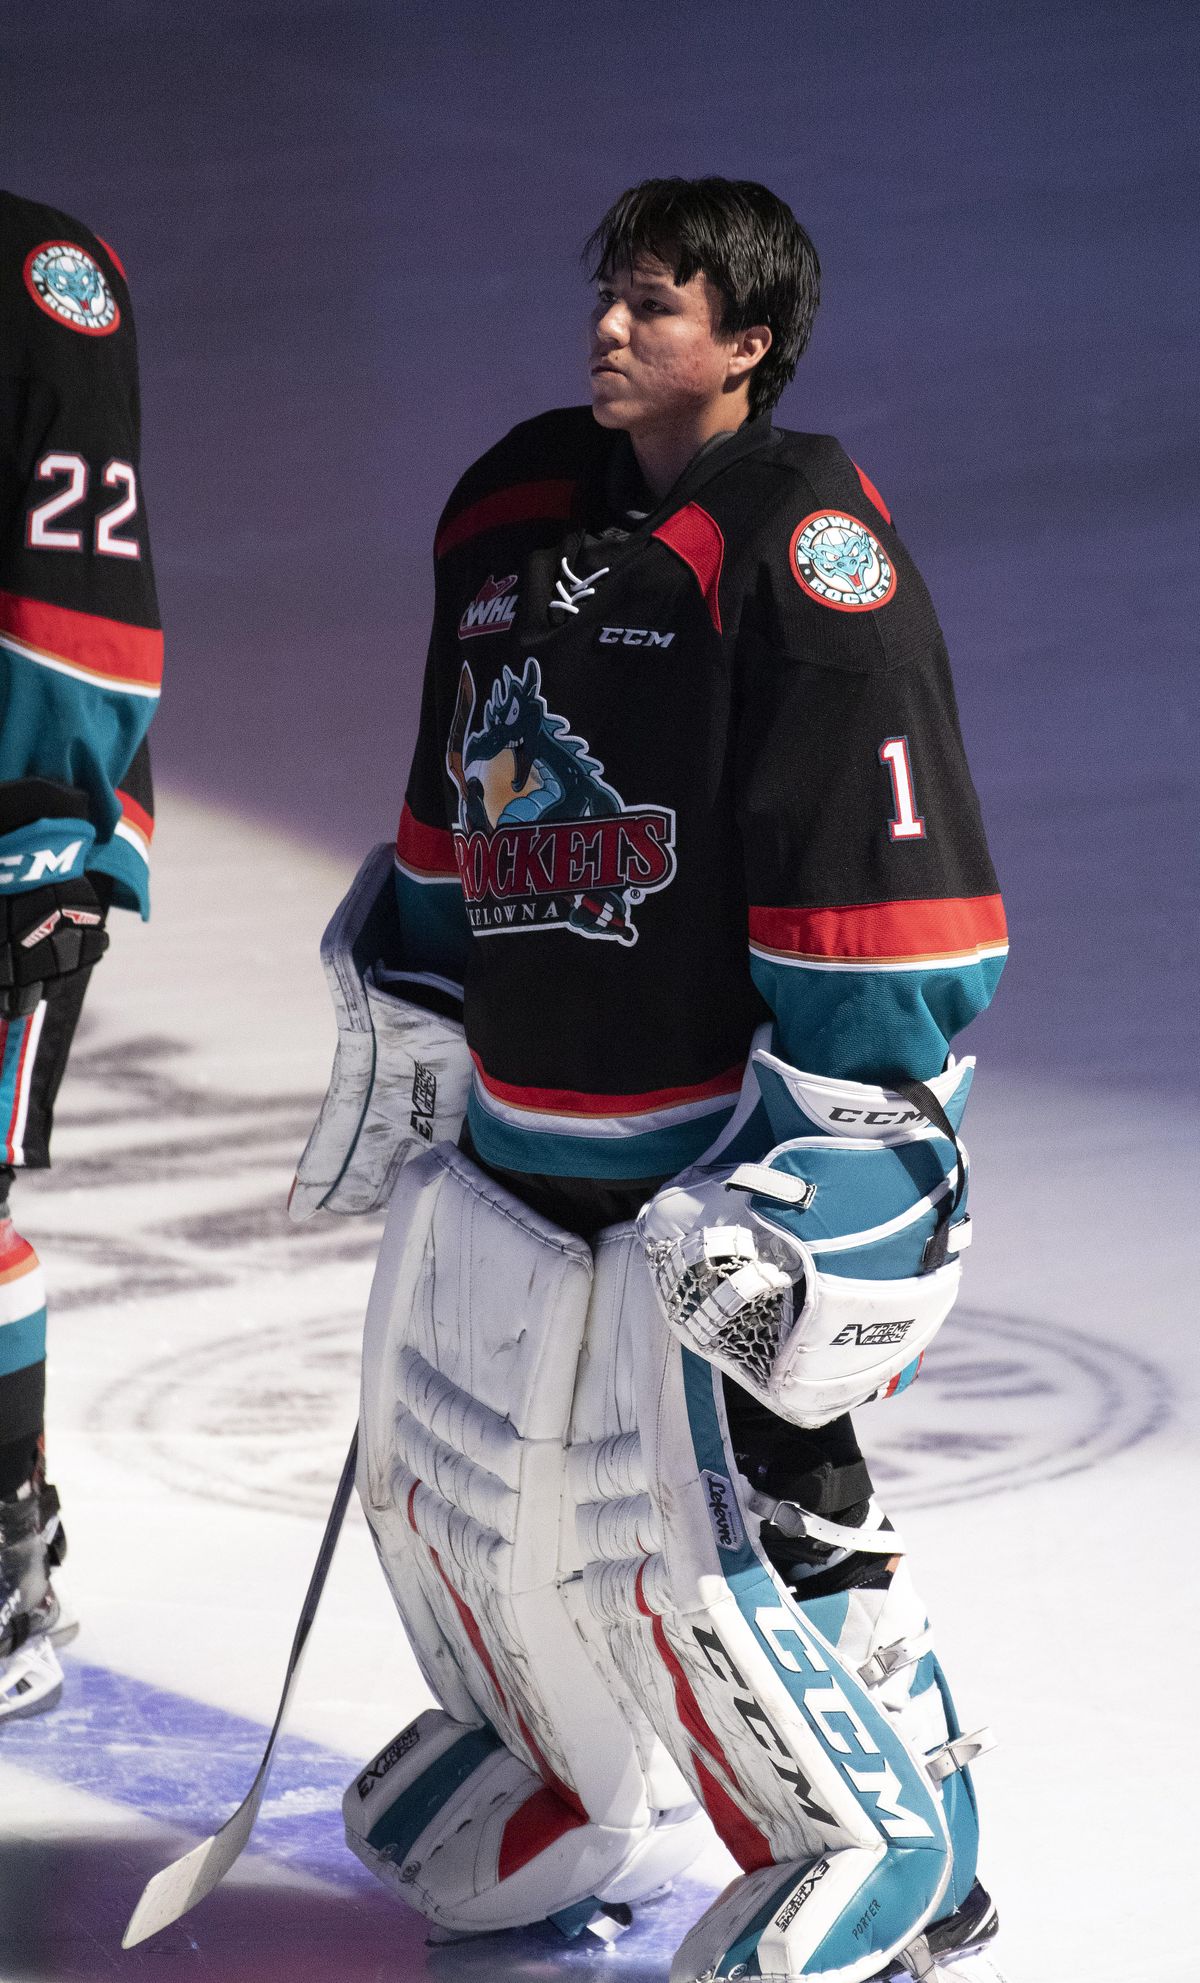 Kelowna goalie James Porter listens to the U.S. and Canadian national anthems before a Chiefs-Rockets hockey game on Feb. 1 at the Spokane Arena. (Colin Mulvany / The Spokesman-Review)